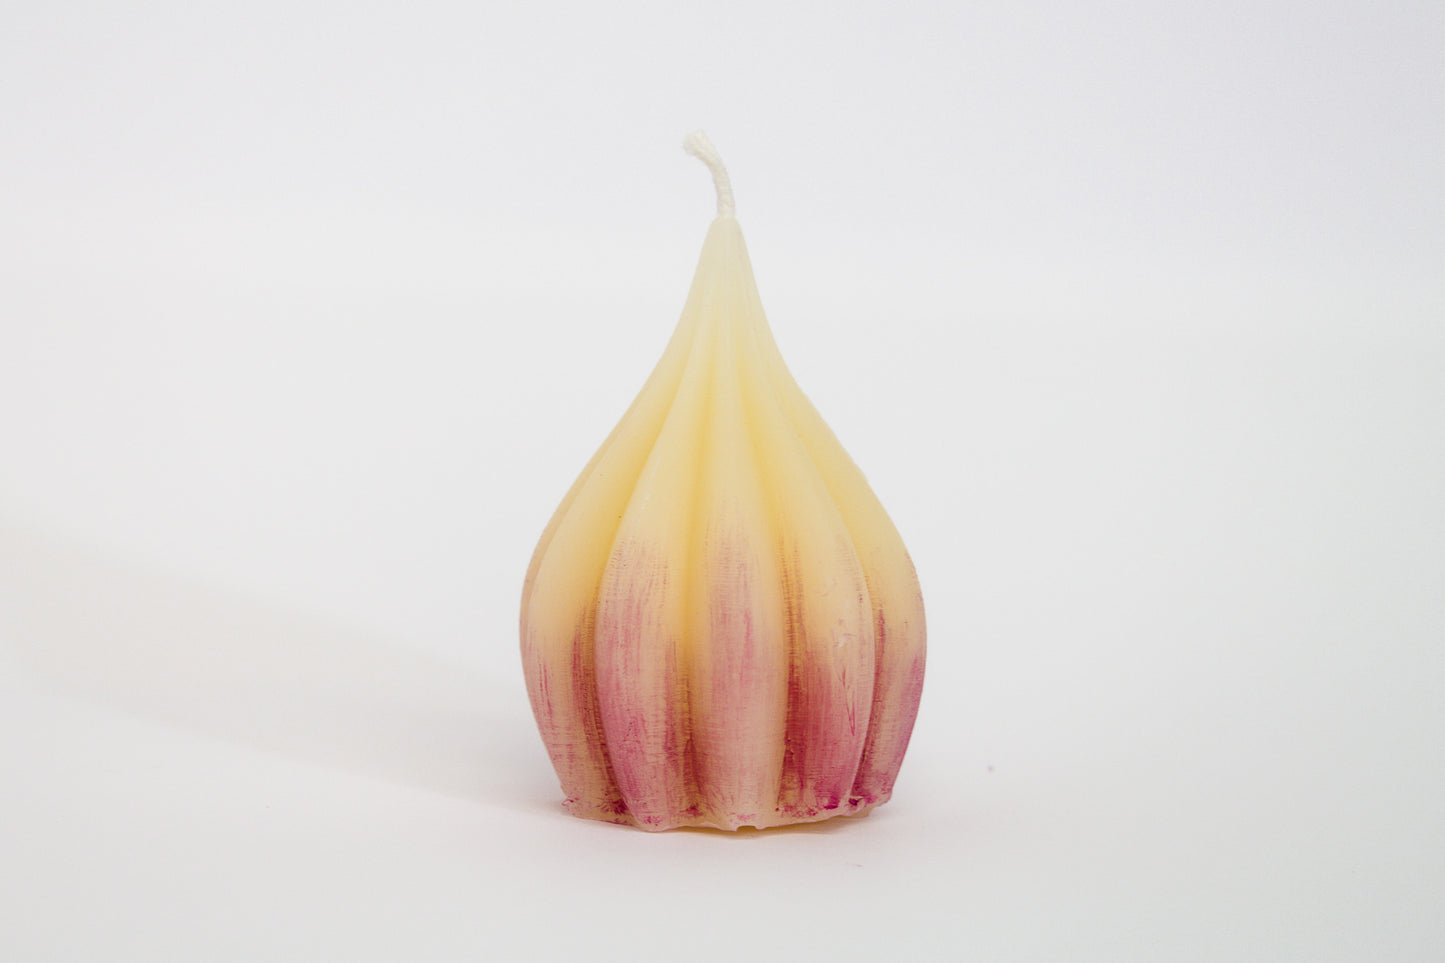 One large garlic-shaped beeswax candle with purple tint on white background